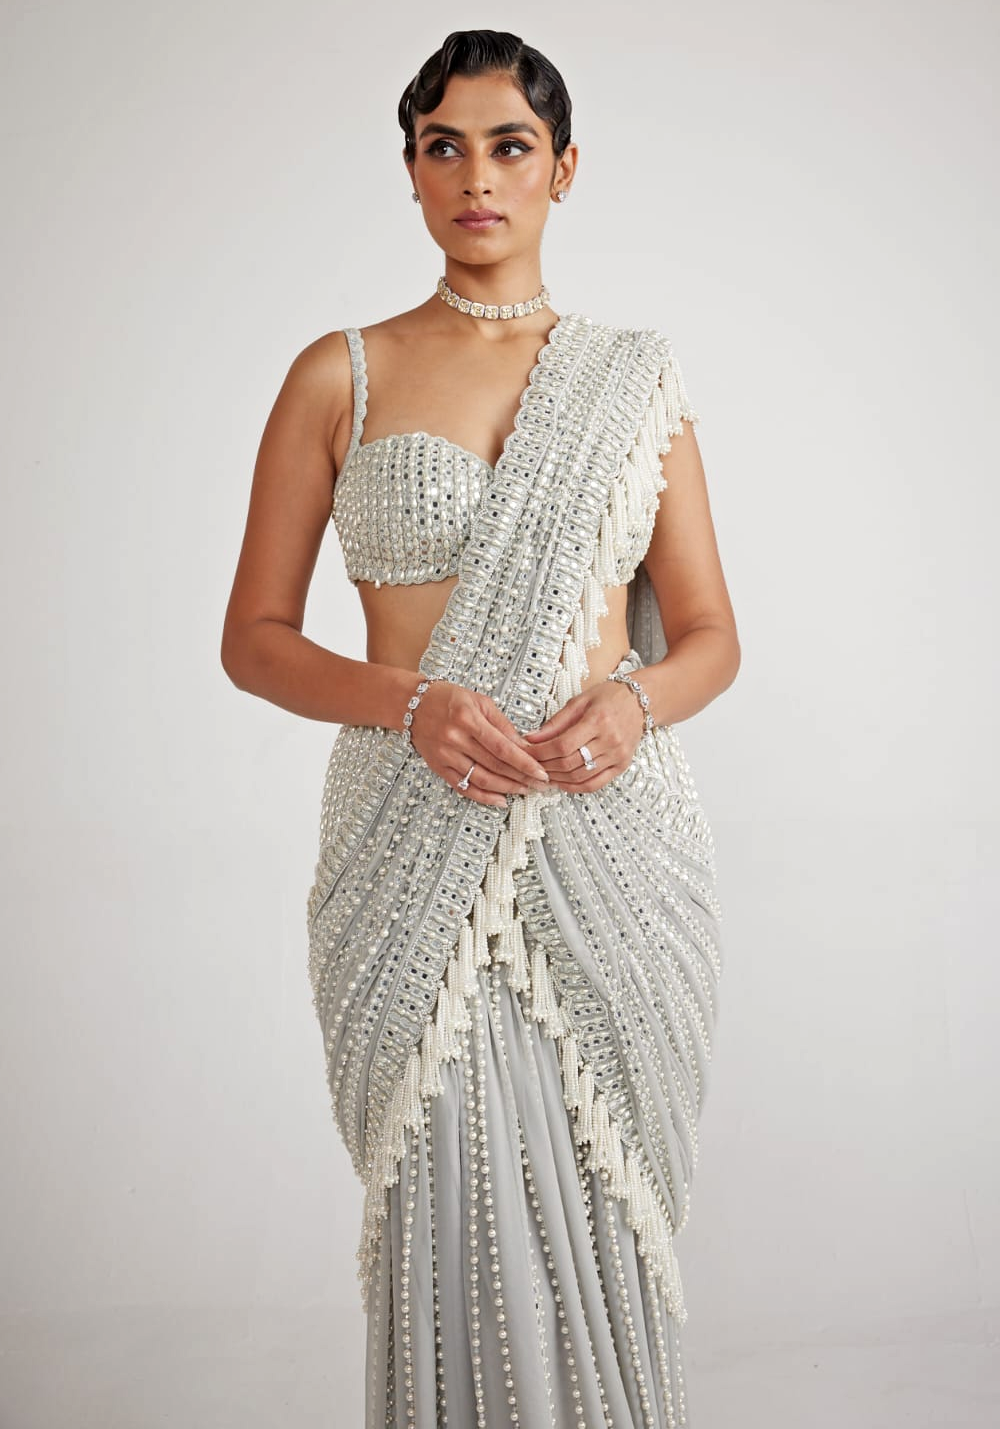 Timeless Elegance: The Grace of Pearl Sarees